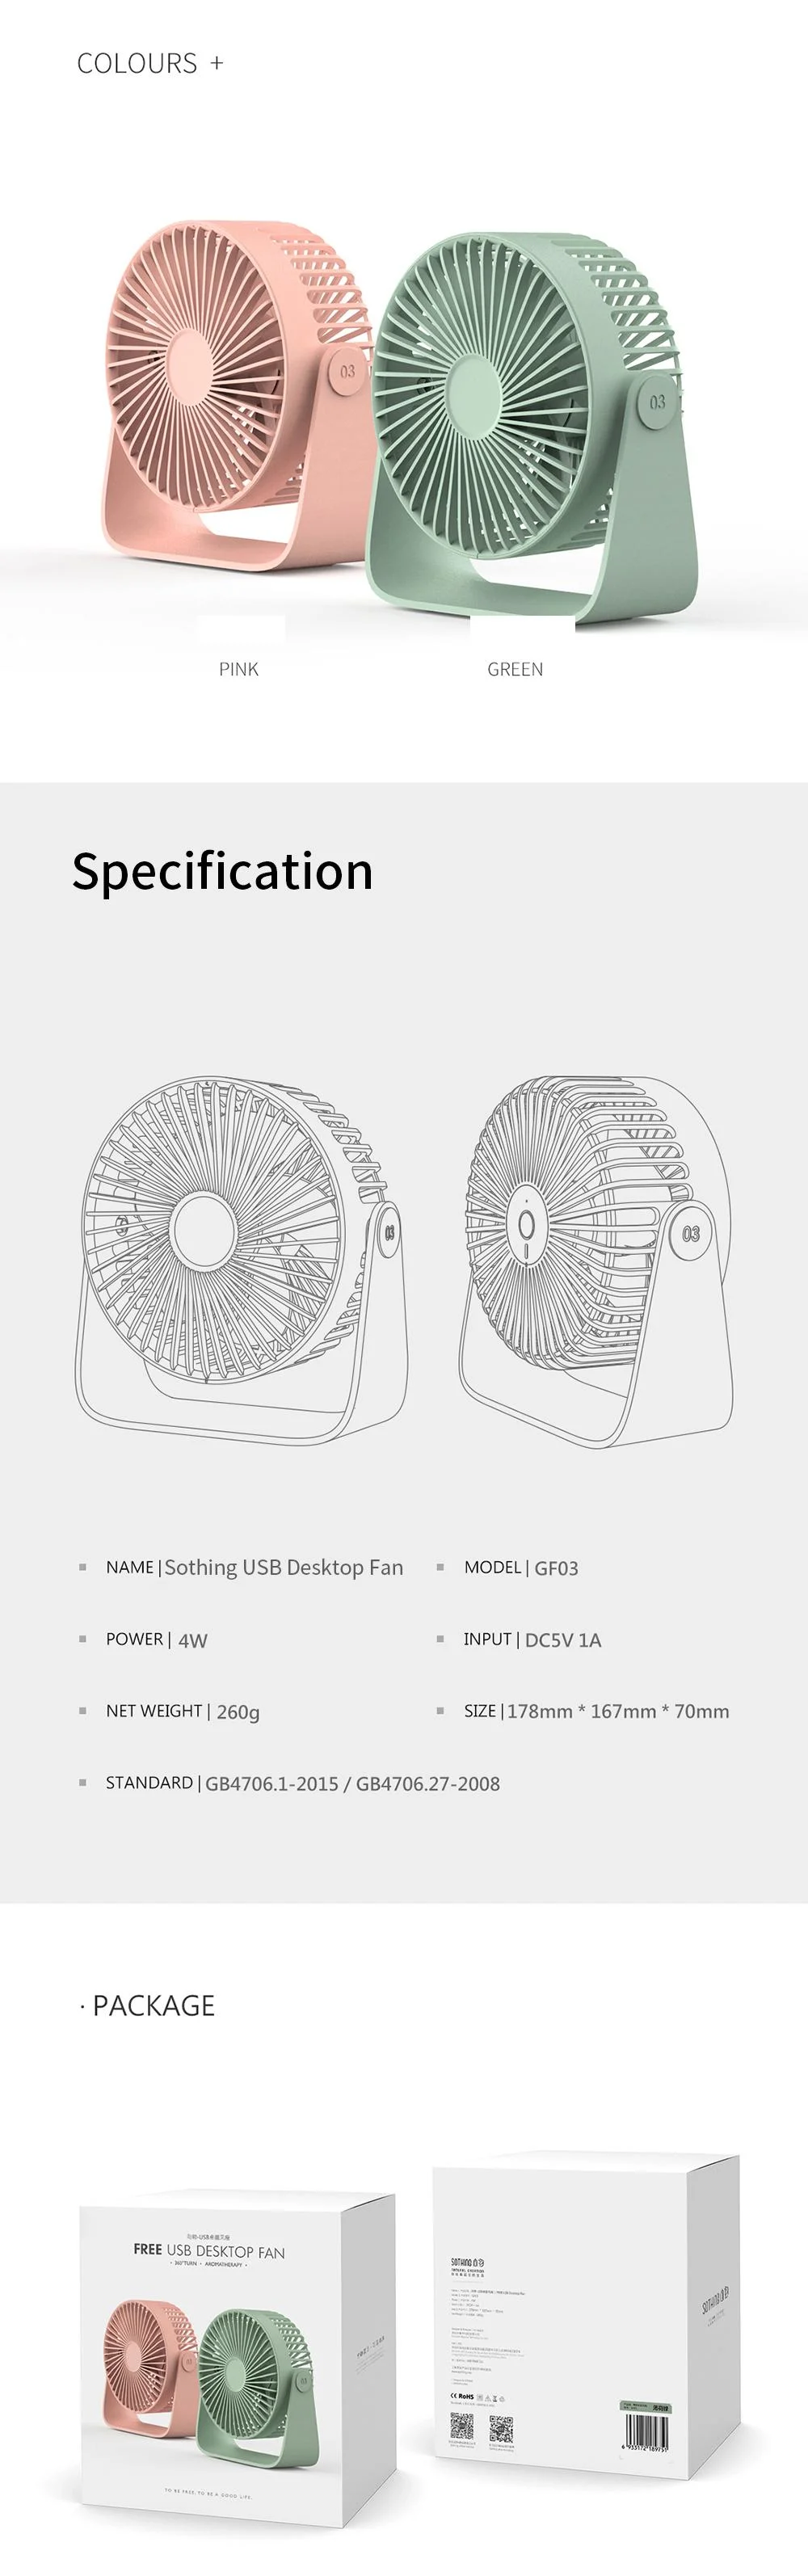 Xiaomi Sothing USB Desktop Fan 360 degree air adjustment for Home and Office easily removed portable rechargeable fan